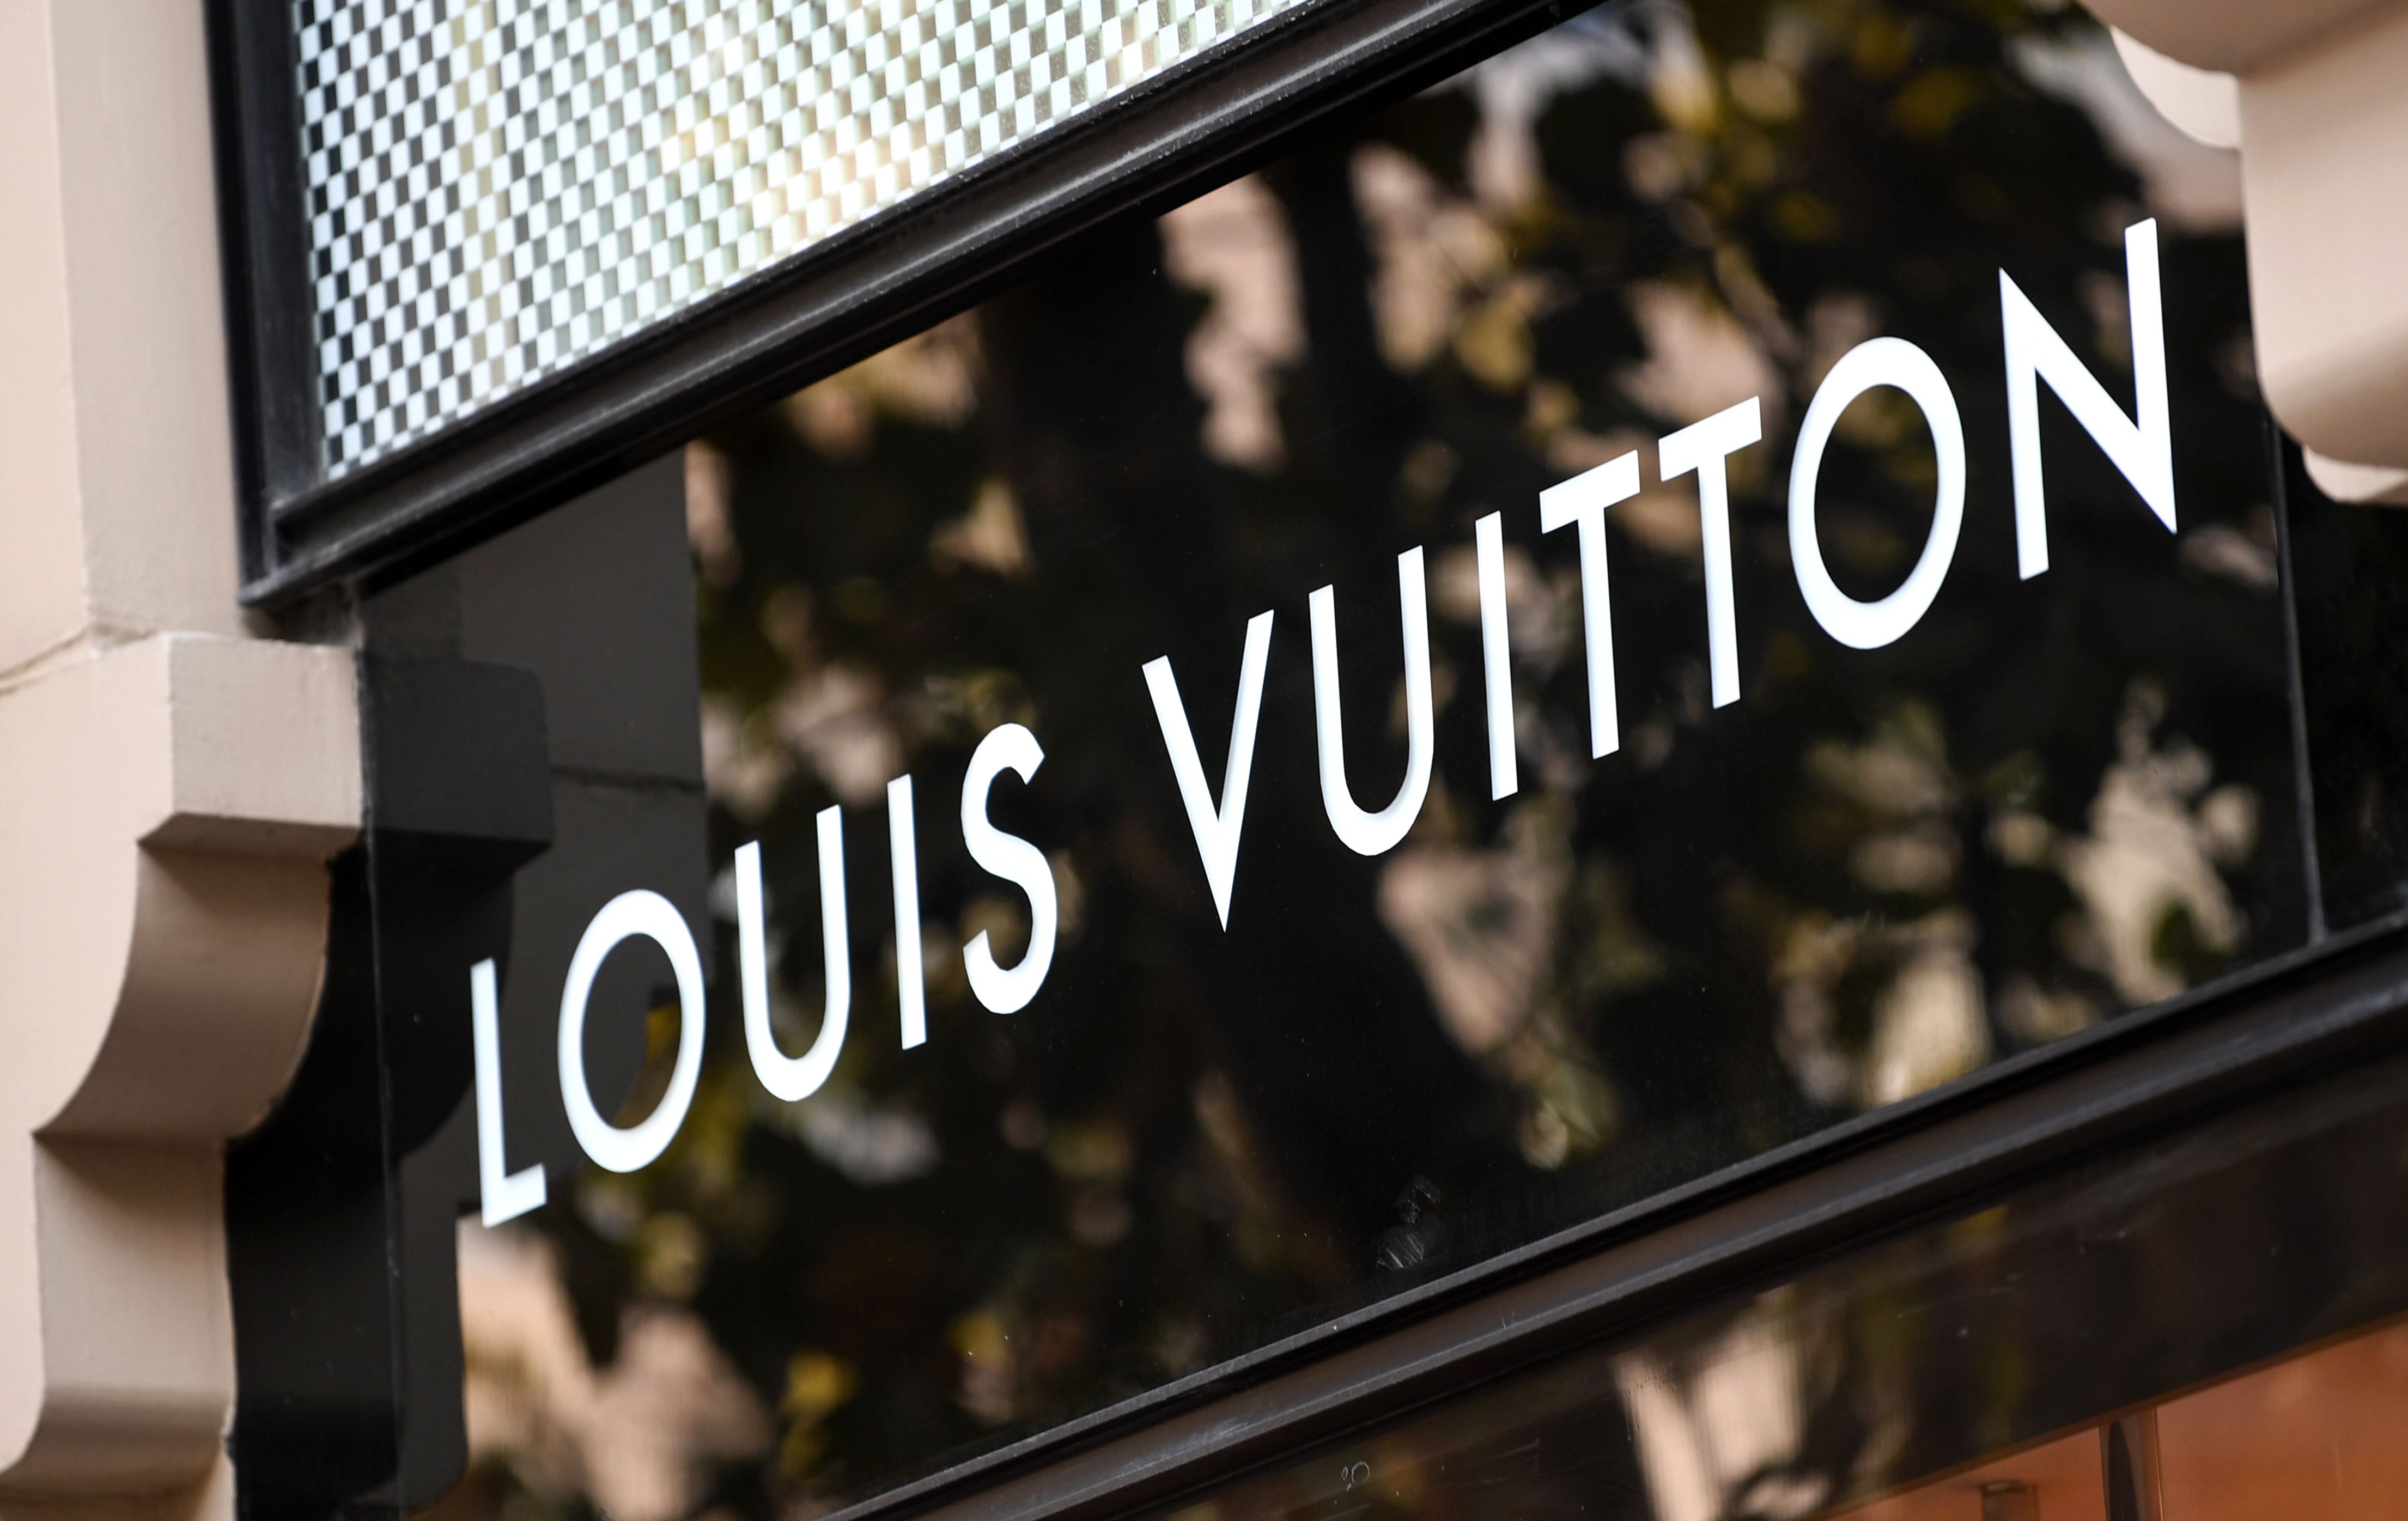 Louis Vuitton is criticised after it launches a $705 tie inspired by a  Palestinian keffiyeh